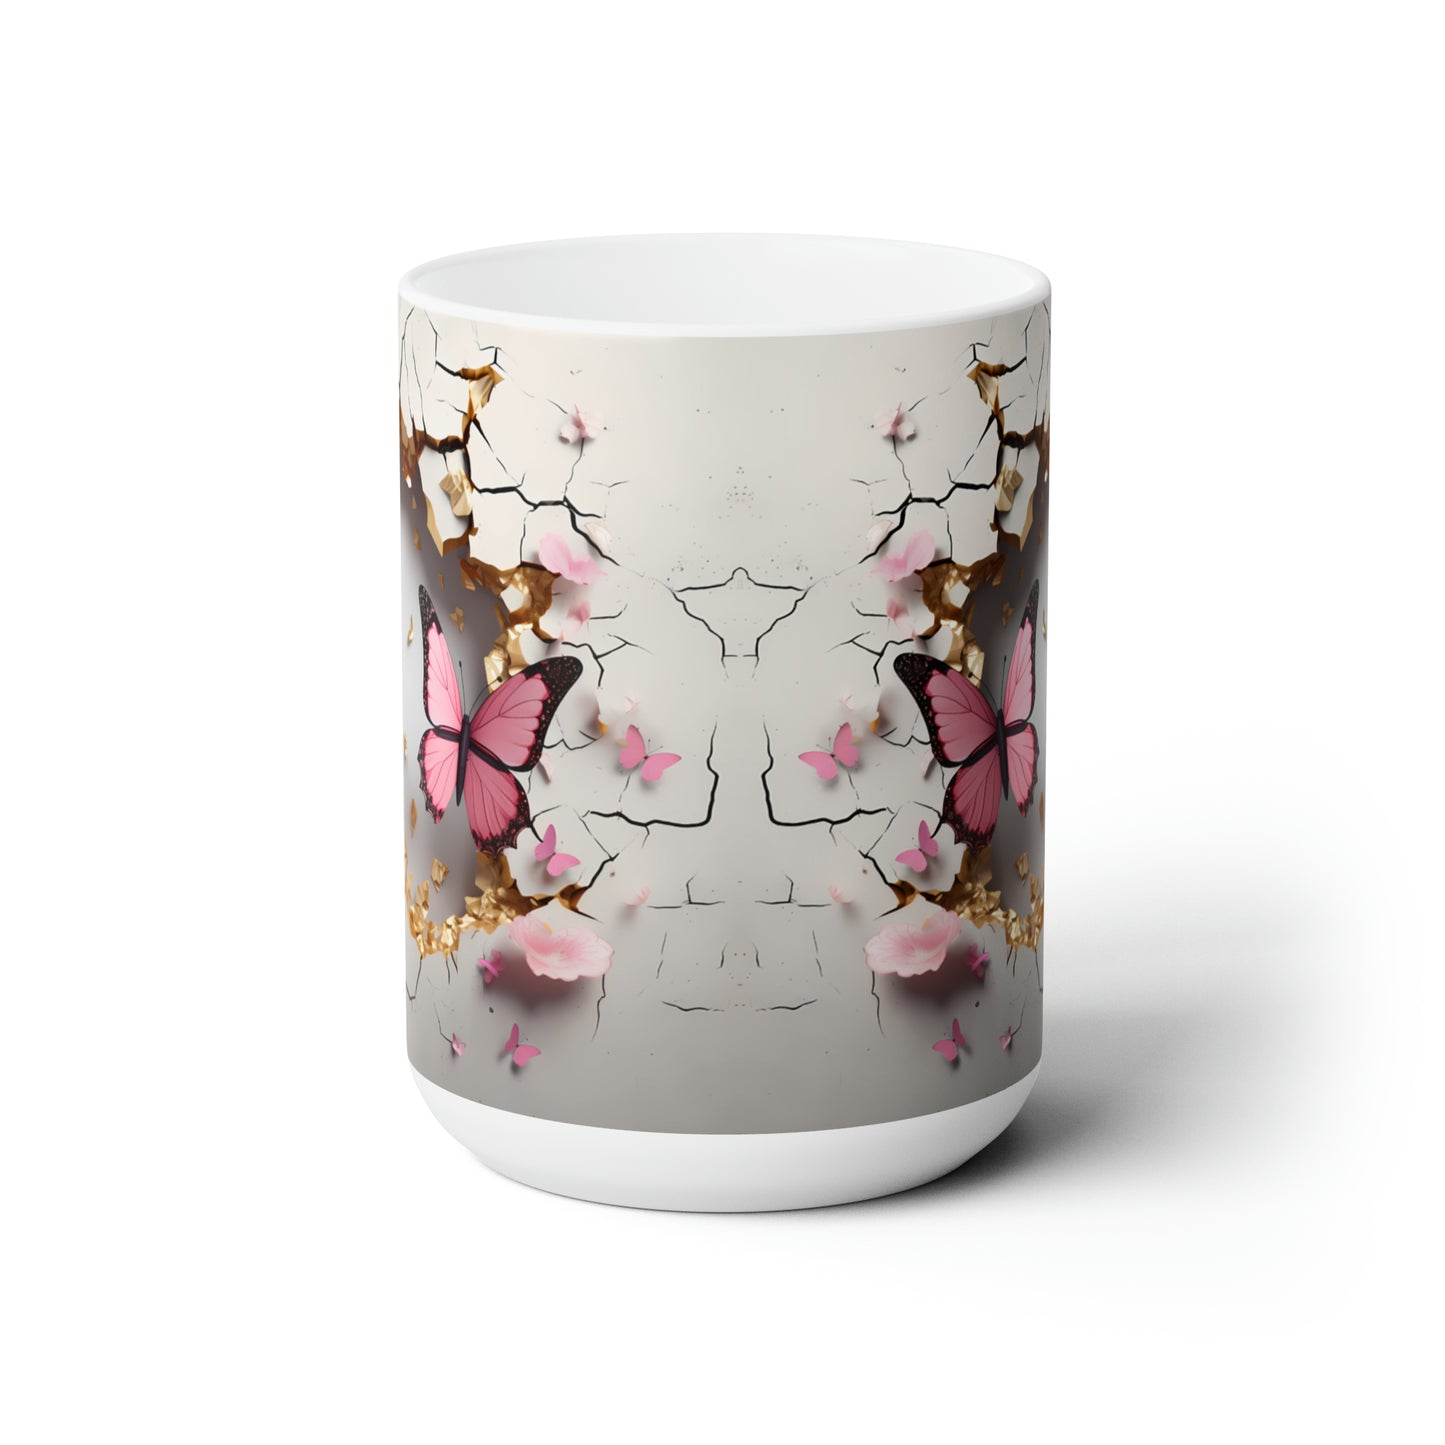 3D Crack In A Wall Pink Butterfly, Butterfly coffee mug, Mug design, Mug wrap, 3D mug wrap, butterfly mug, Ceramic Mug 15oz